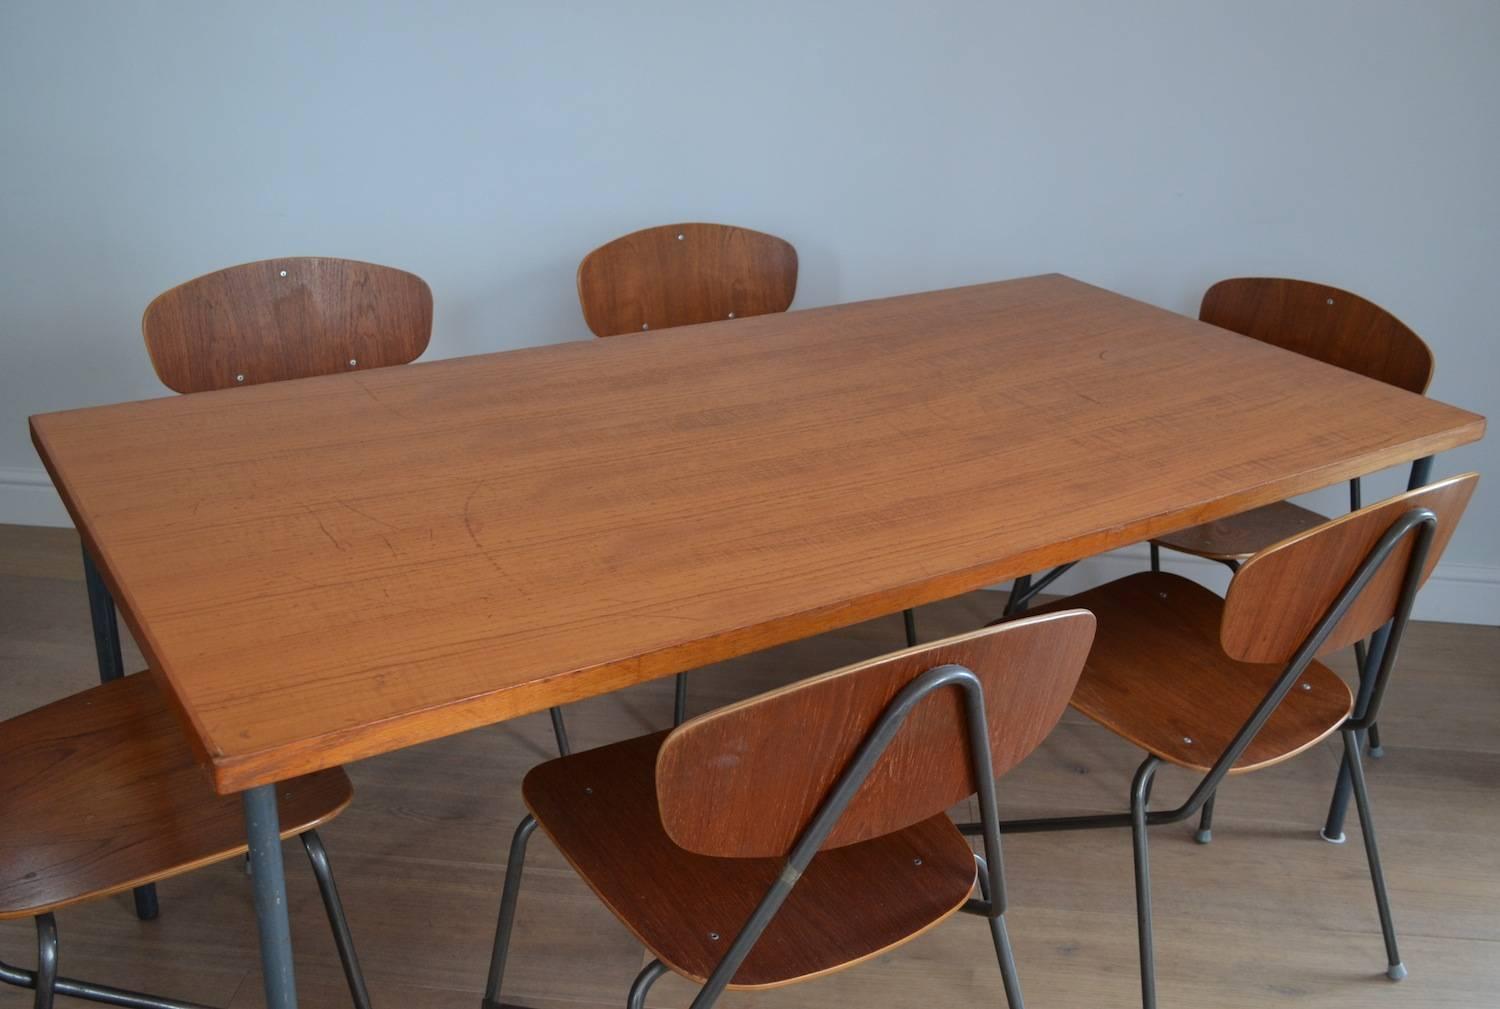 A 1970s vintage Industrial teak dining table and a set of six stacking chairs by Remploy.

Featuring beautifully shaped moulded ply and rich teak veneer seats and backrests, with tubular steel V frames. The seats have a lovely form and are